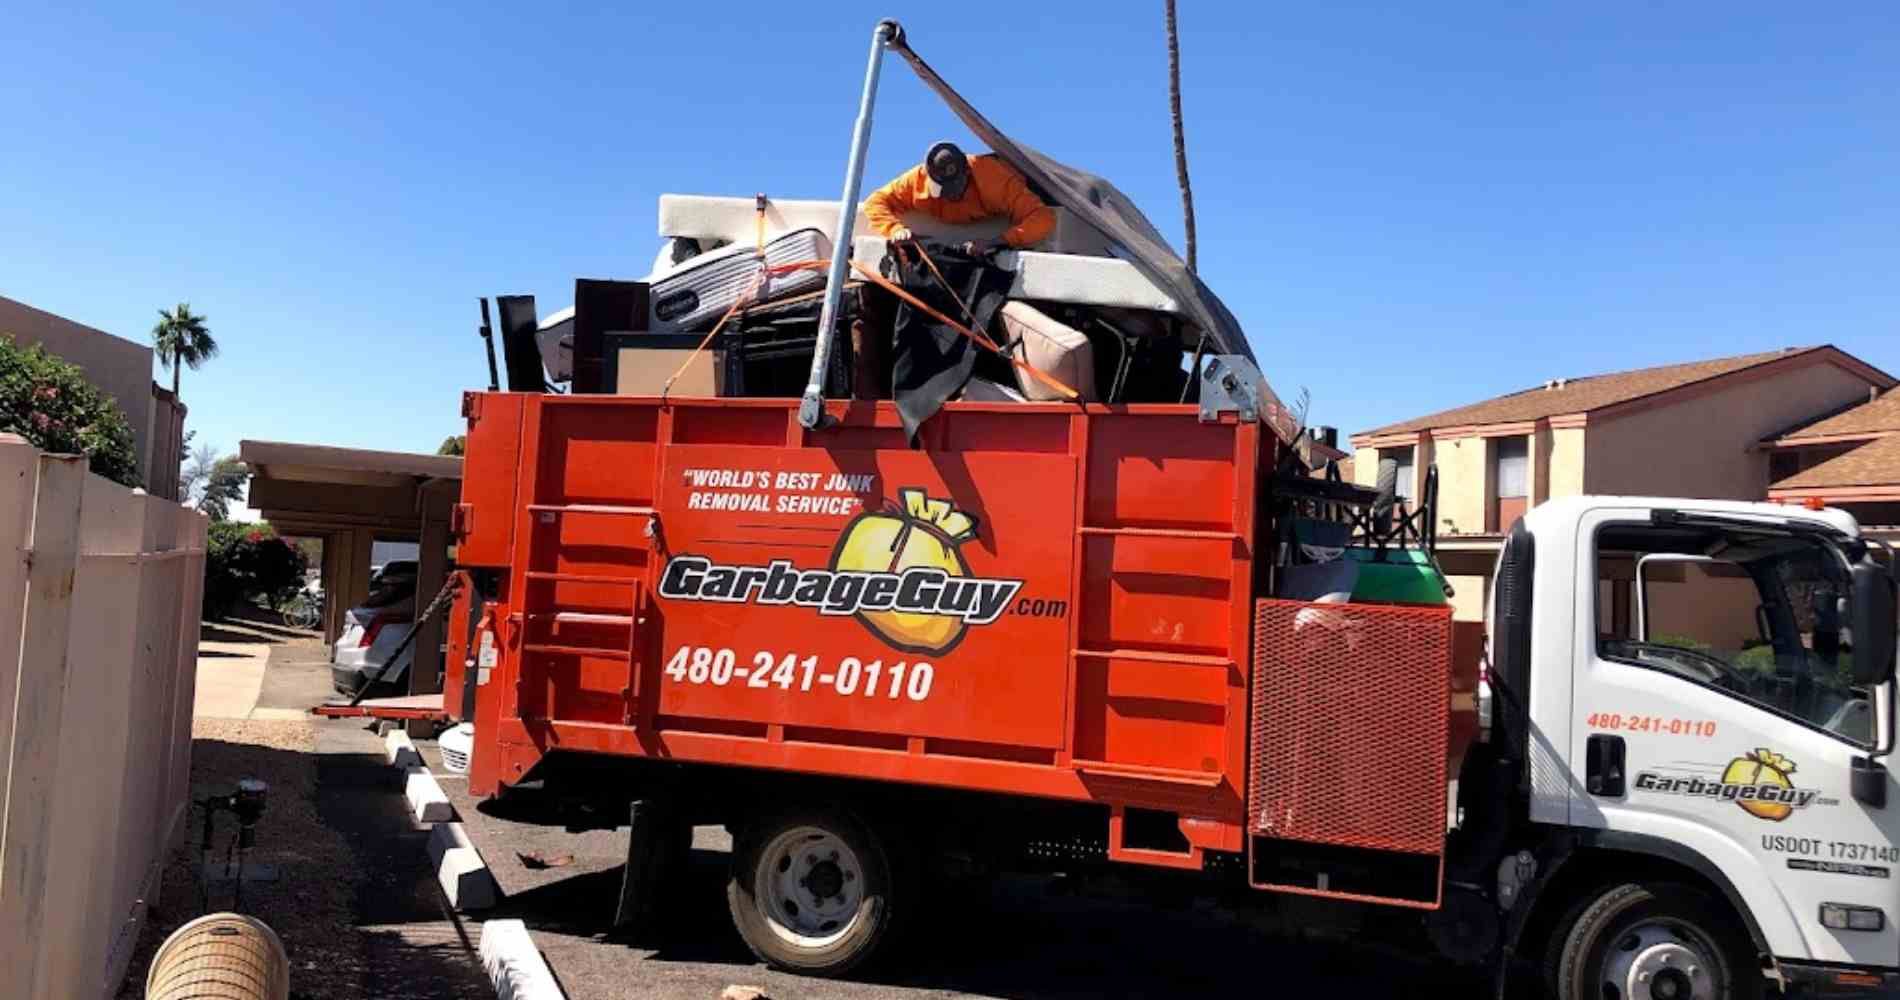 #1 for Furniture Removal in Chandler, AZ With Over 1200 5-Star Reviews!